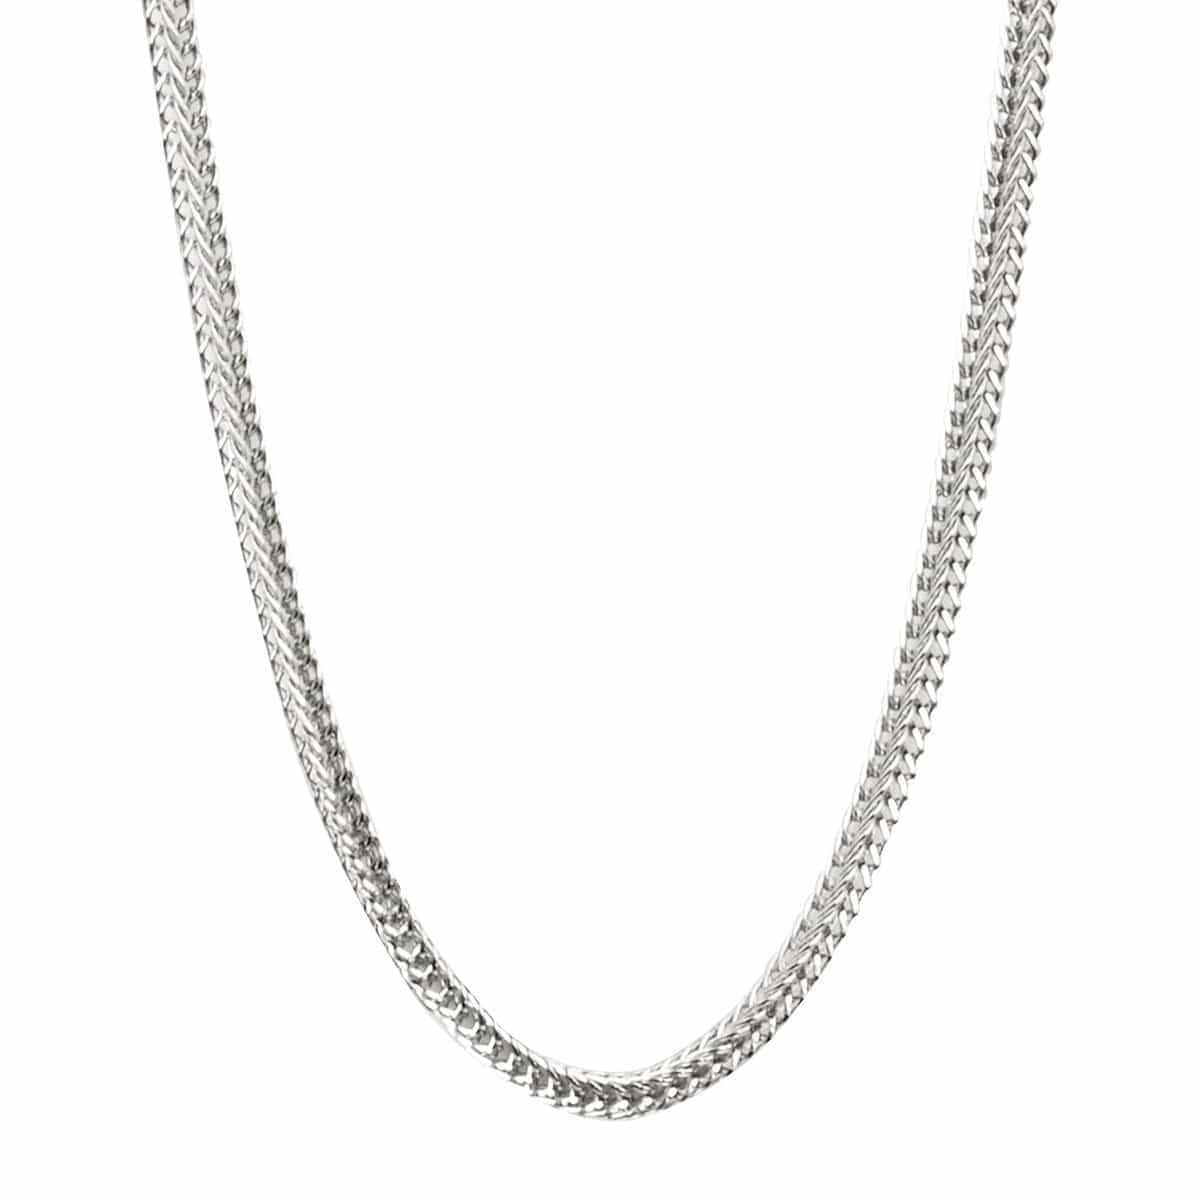 INOX JEWELRY Chains Silver Tone Stainless Steel Polished 1mm Square Wheat Chain